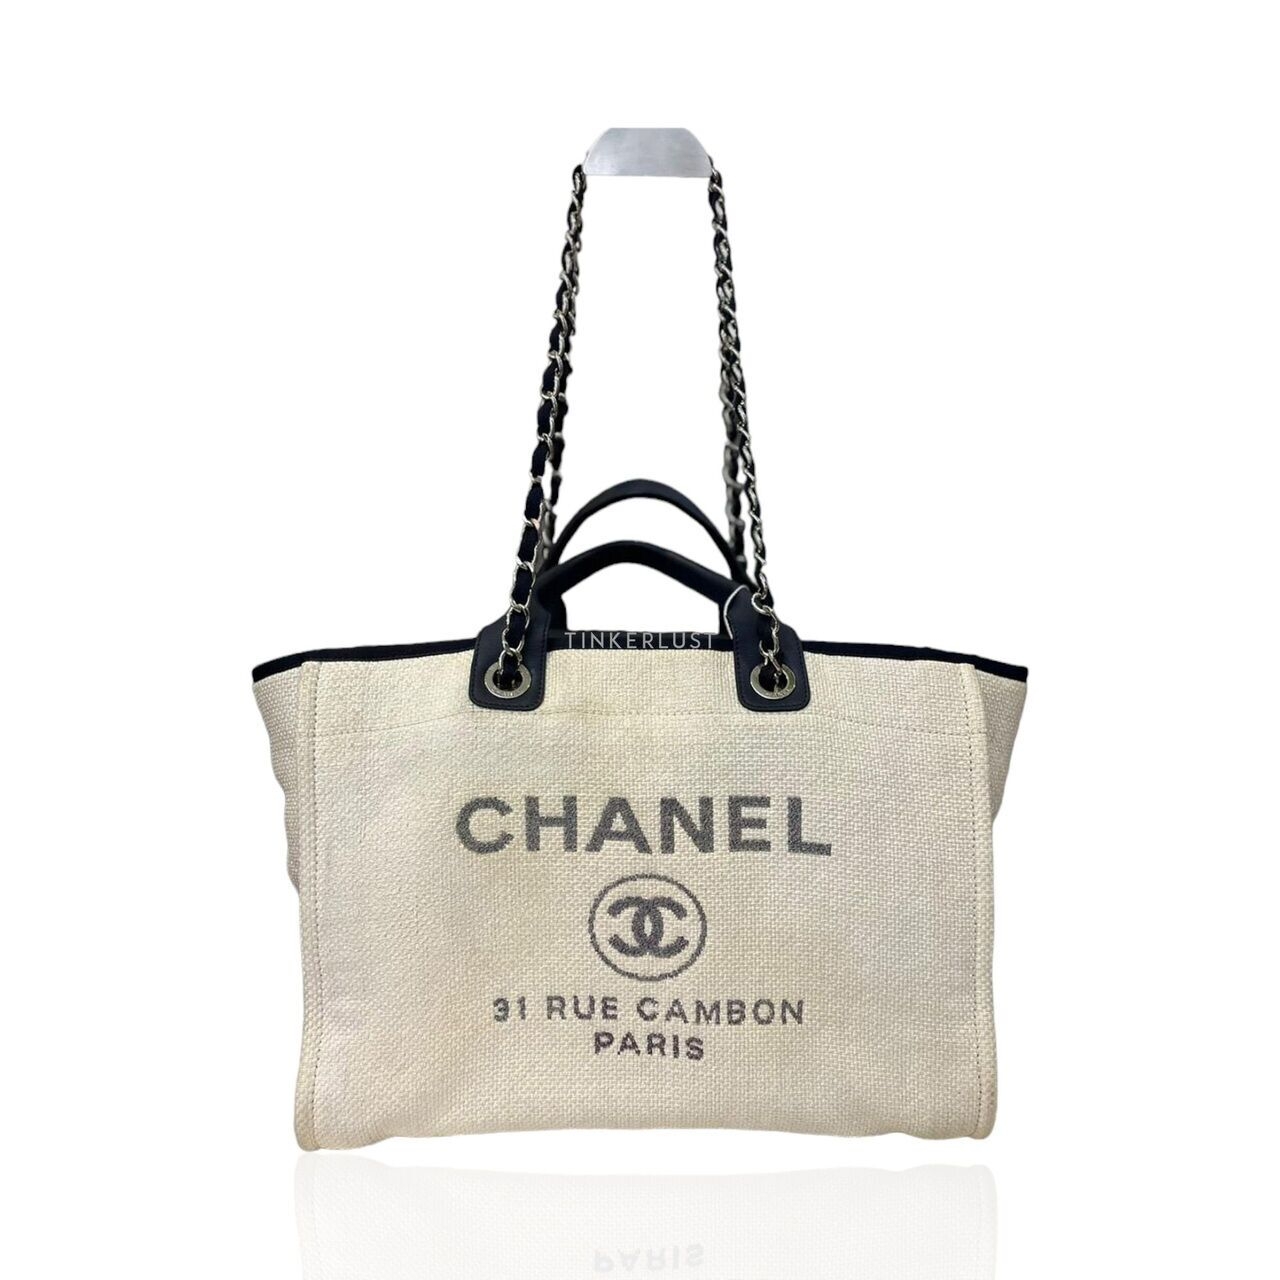 Chanel Deauville Large White Navy Shopping Bag #25 Tote Bag